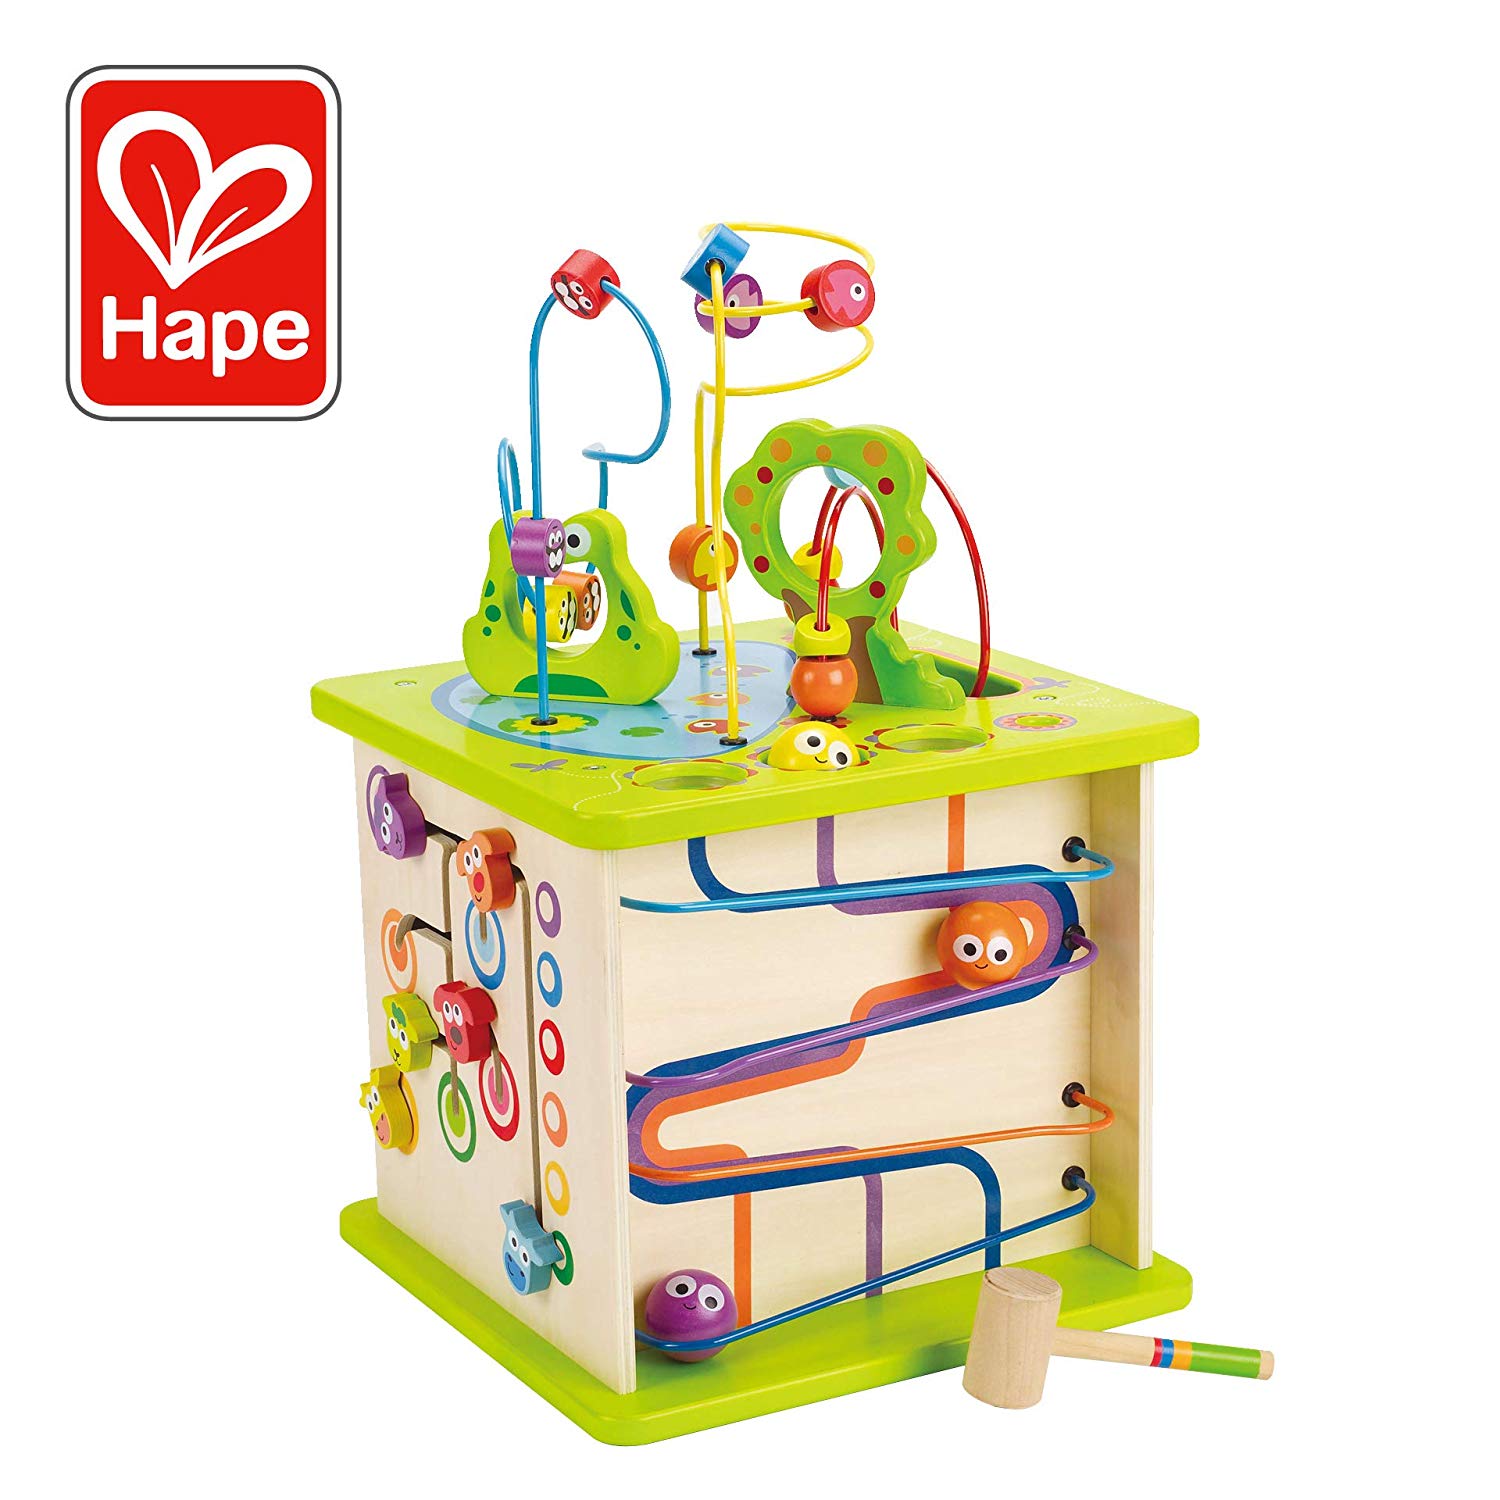 Hape - E1810 - Toy First Age - Activity Cube